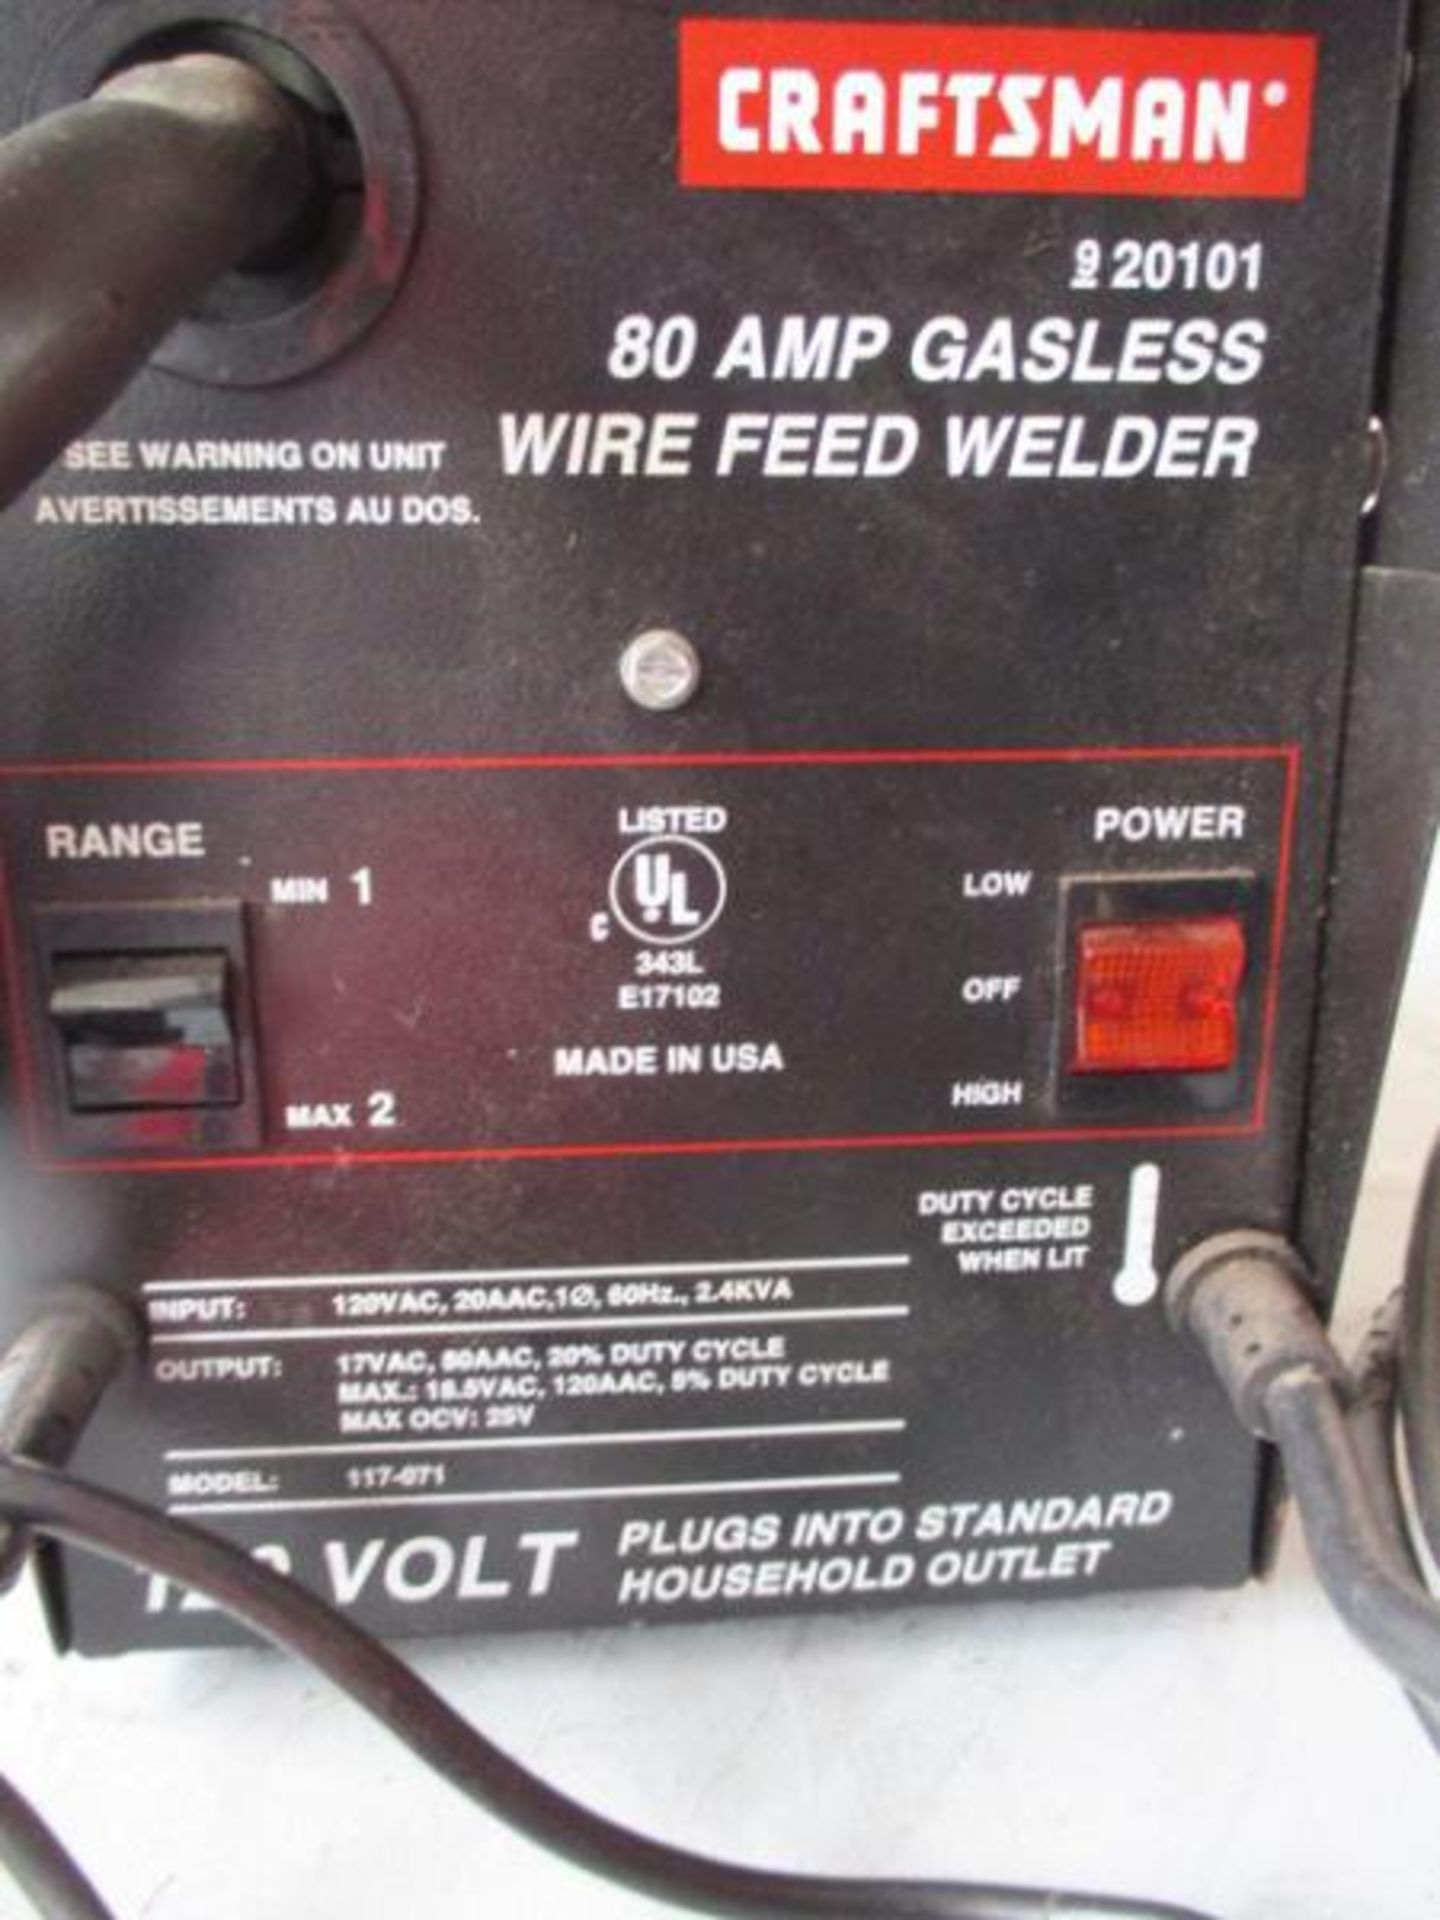 Craftsman Wire Feed Welder, Model: 920101, 80 Amp Gasless, 120 Volt, Plugs Into Standard Household - Image 3 of 6